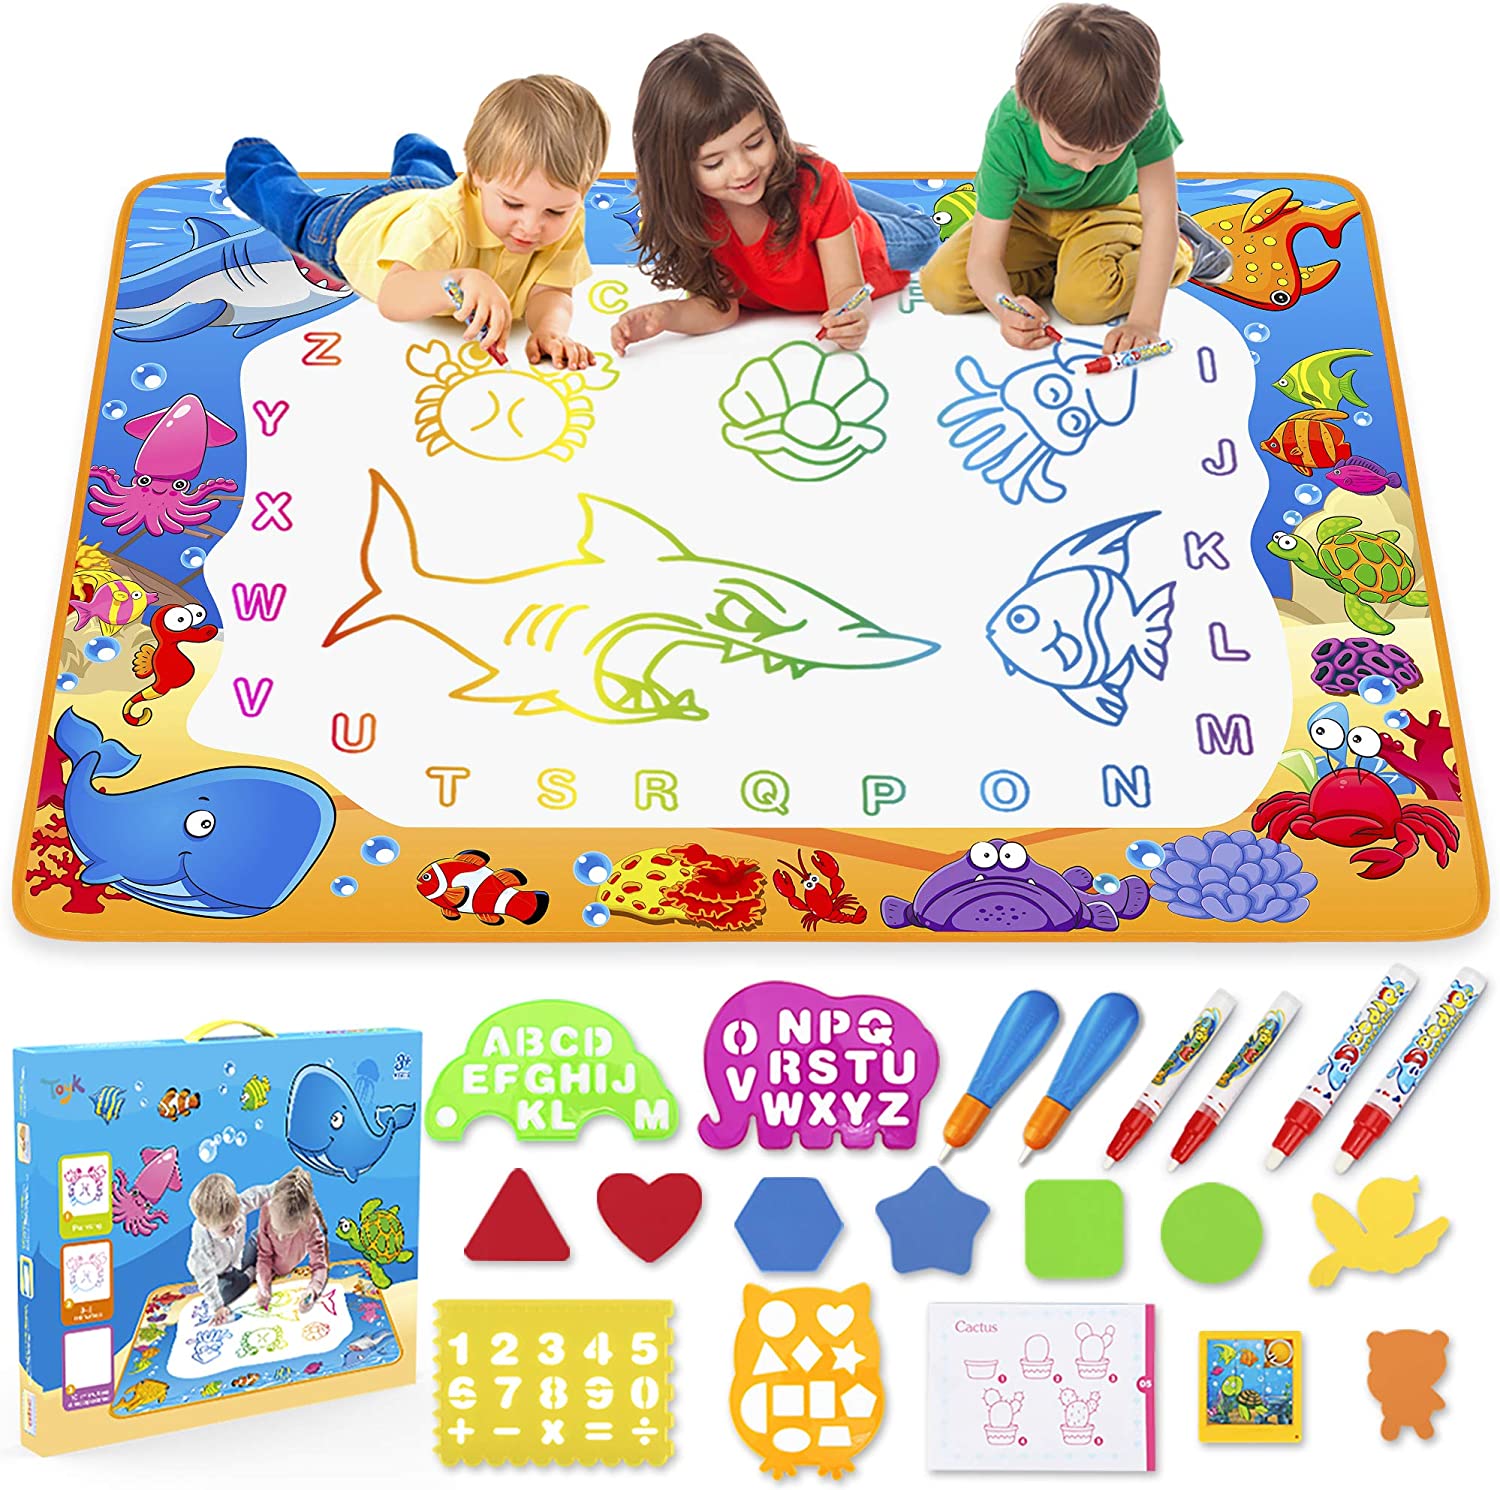 Review of Water Doodle Mat - Kids Painting Writing Doodle Toy Mat